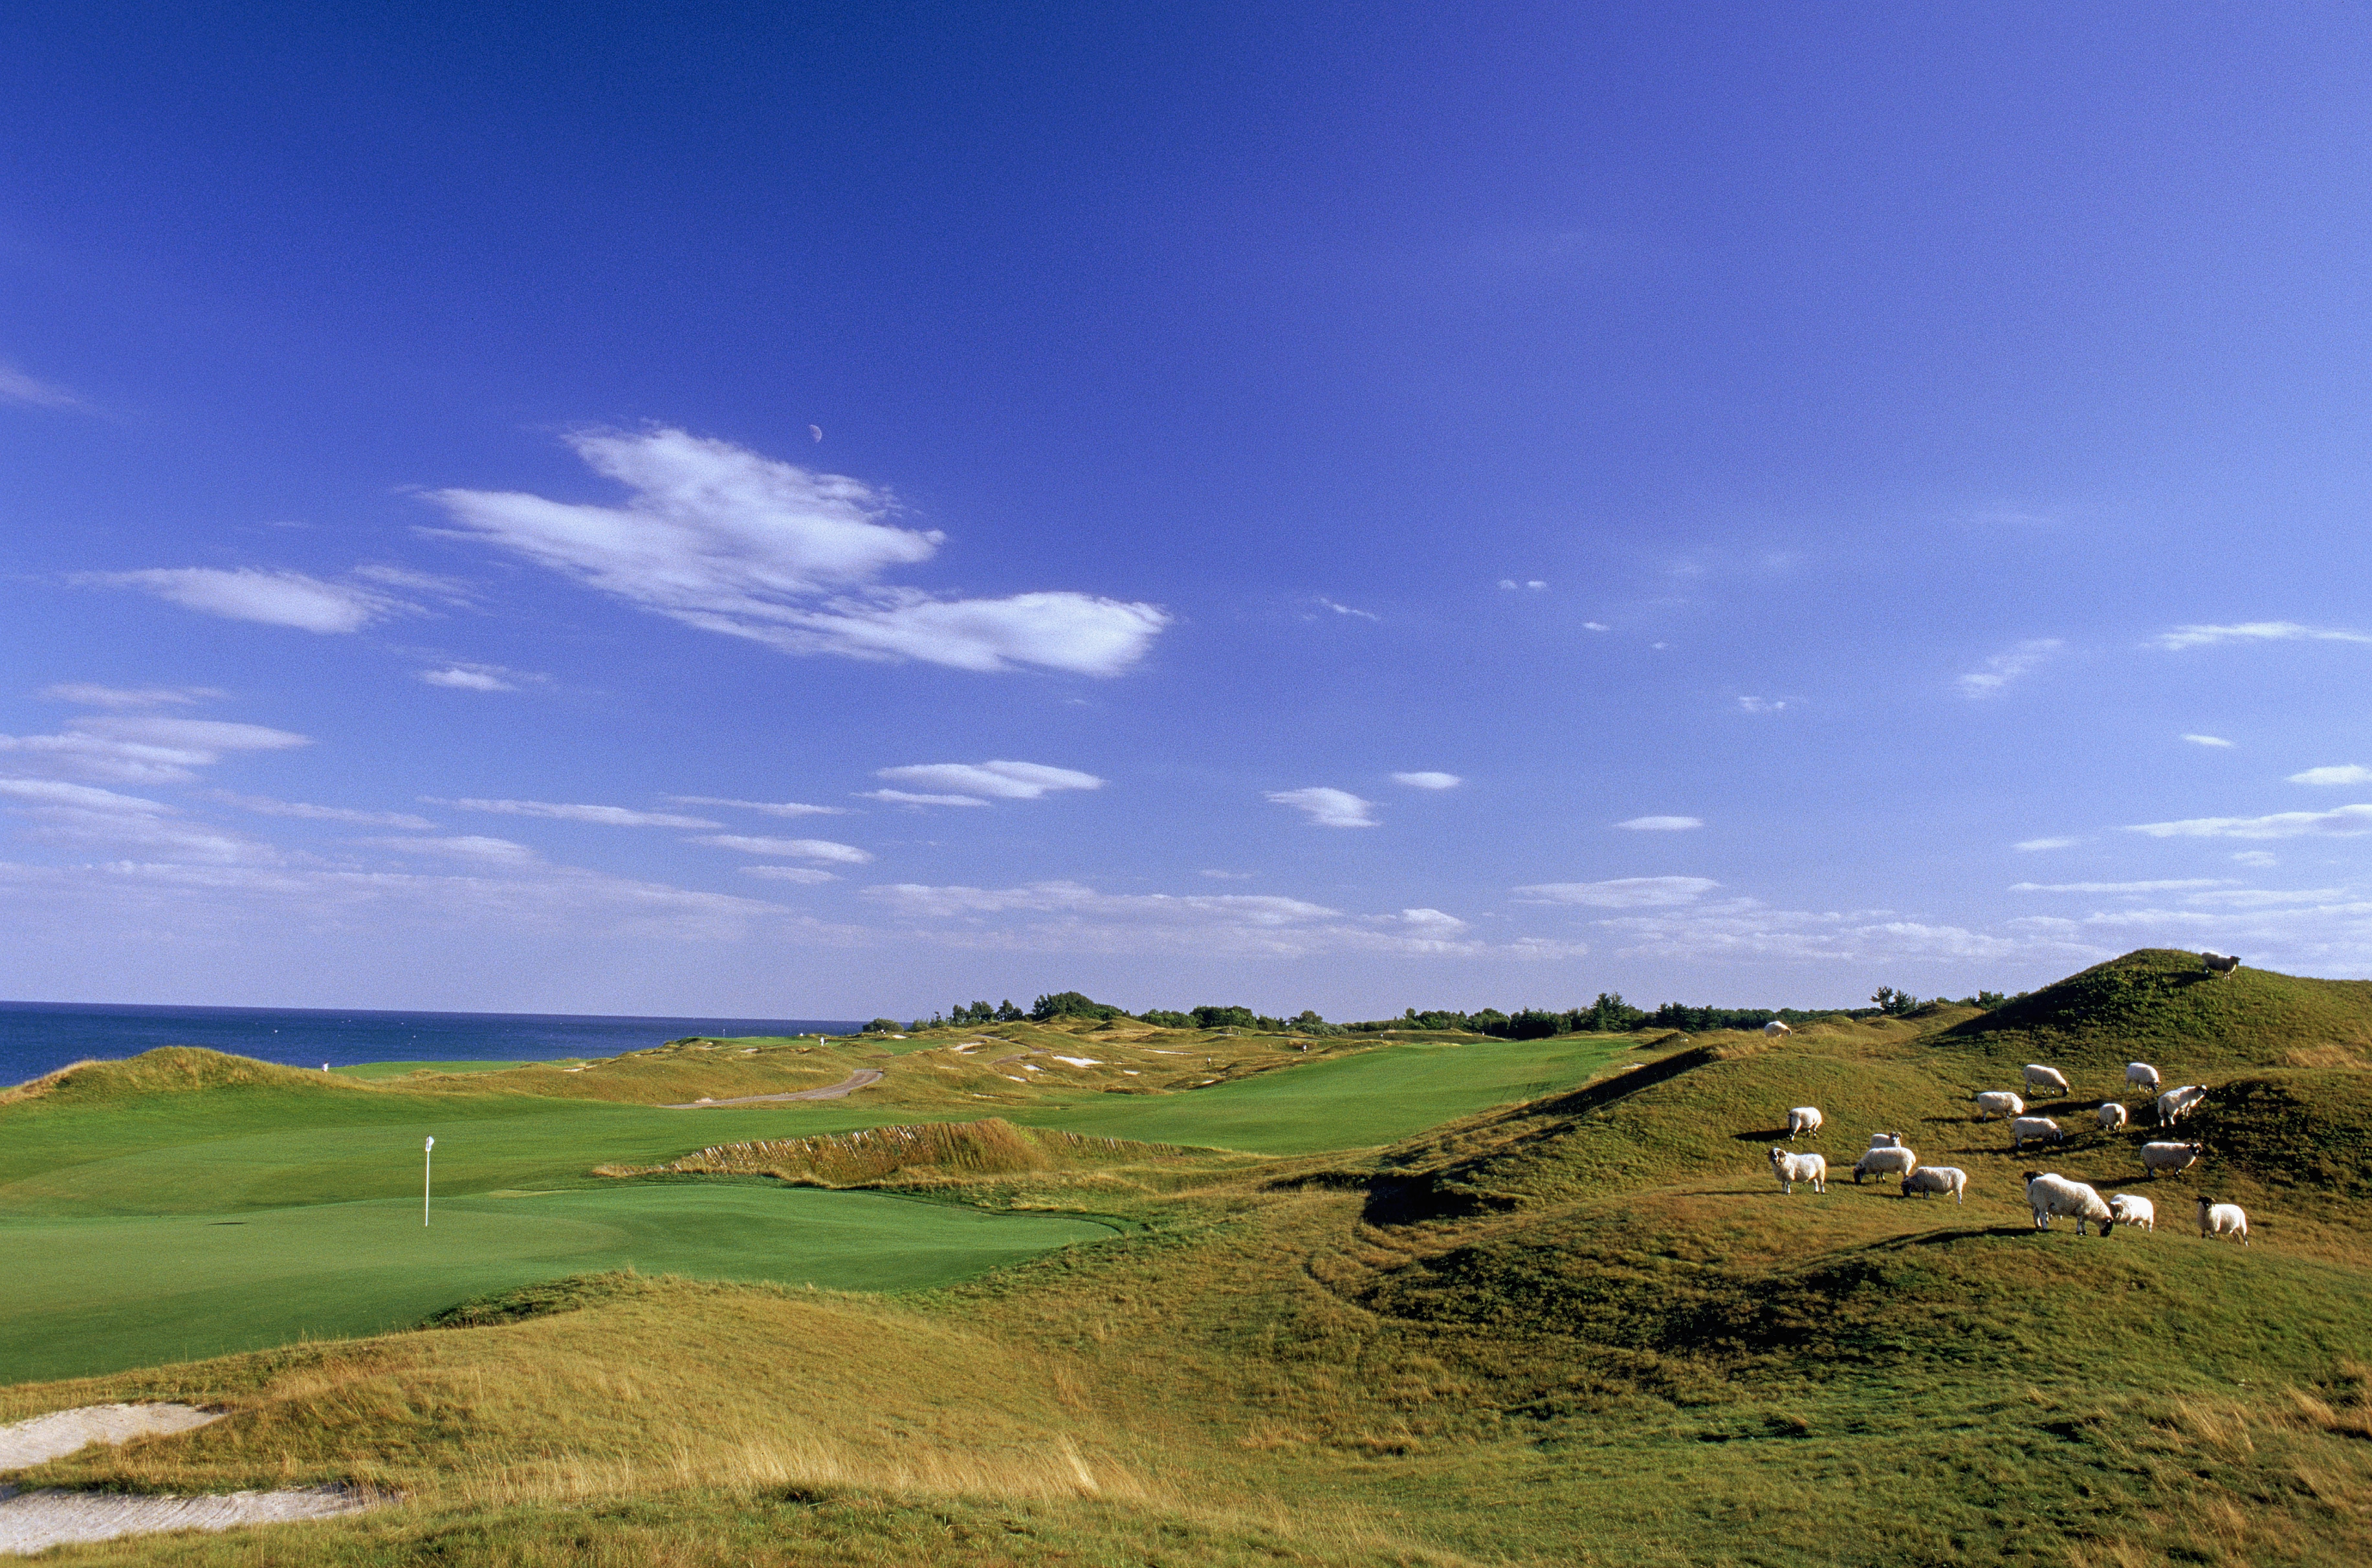 KOHLER, WI - SEPTEMBER 2:  General view of the par 5 11th hole at Whistling Straits Golf Course, site of the 2004 PGA Championship on September 2, 2003 in Kohler, Wisconsin.  Scottish Blackface sheep roam the rough terrain features along Lake Michigan.  (